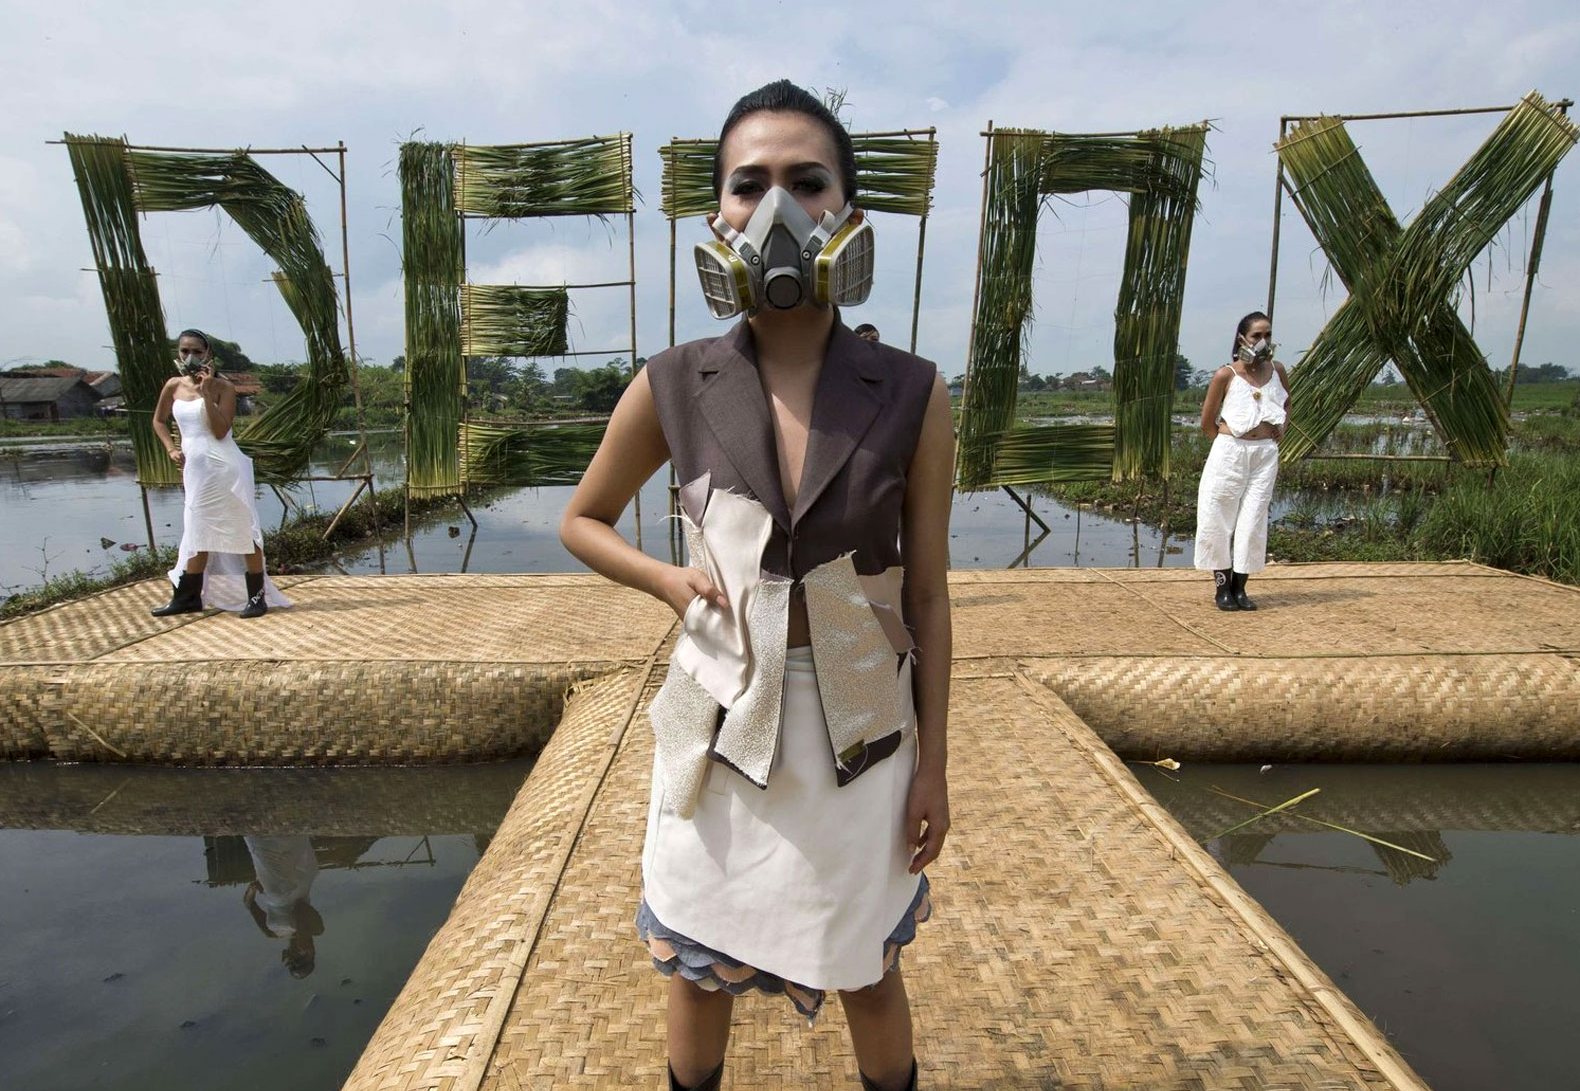 The most and least eco-friendly luxury brands to Greenpeace - Luxurylaunches